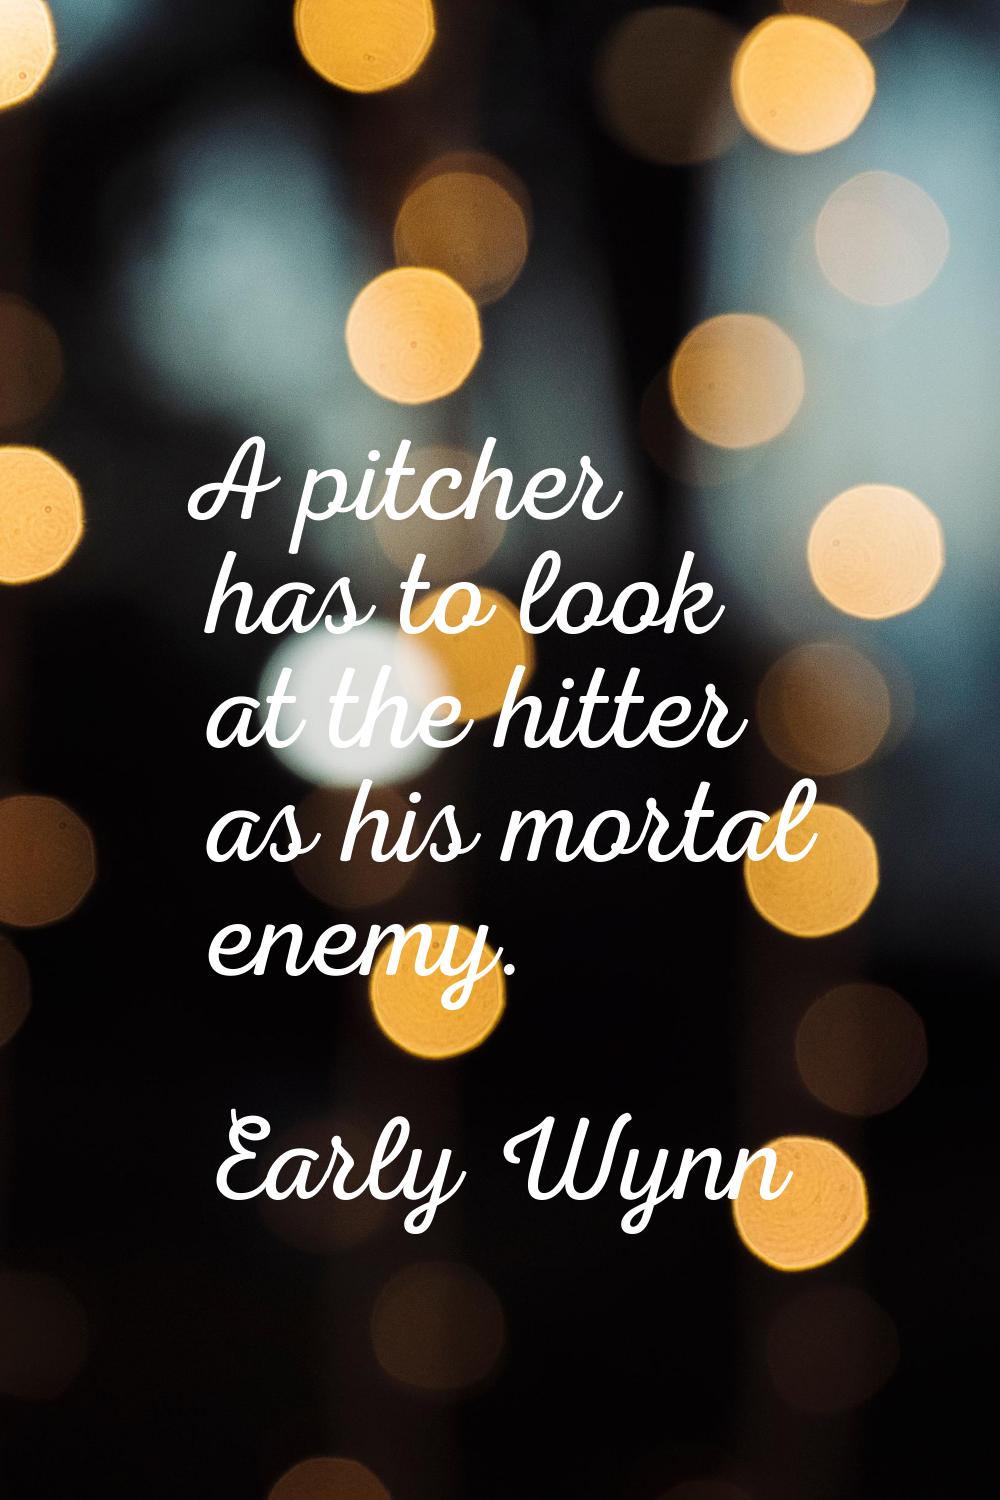 A pitcher has to look at the hitter as his mortal enemy.